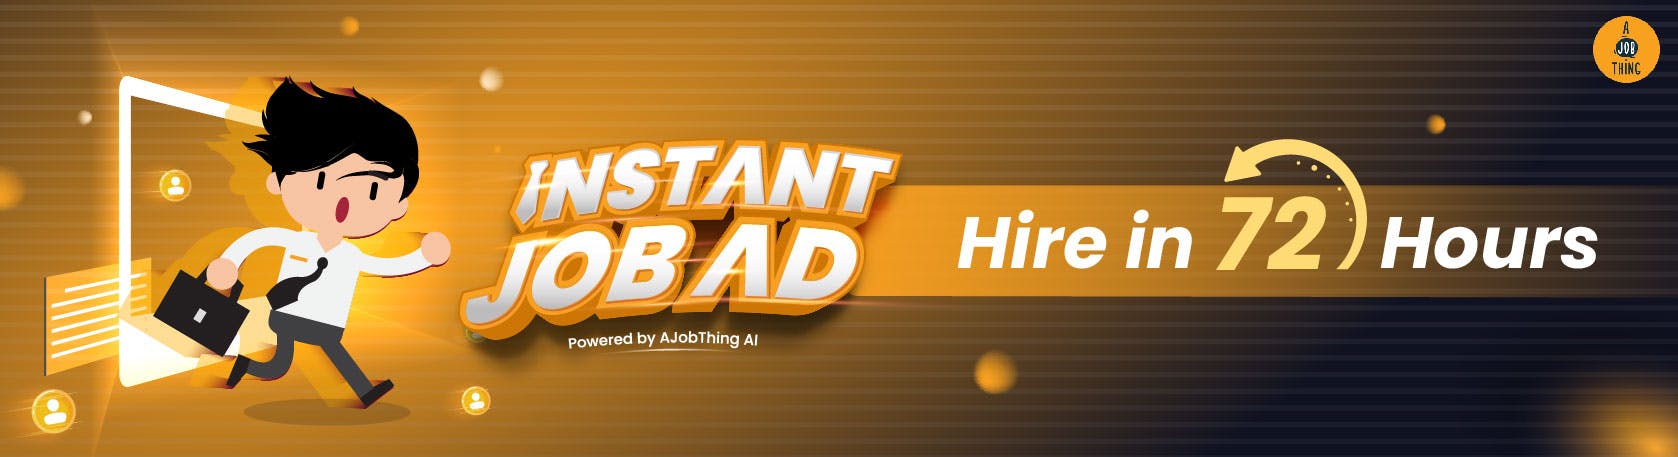 Instant Job Ad Hire in 72 Hours